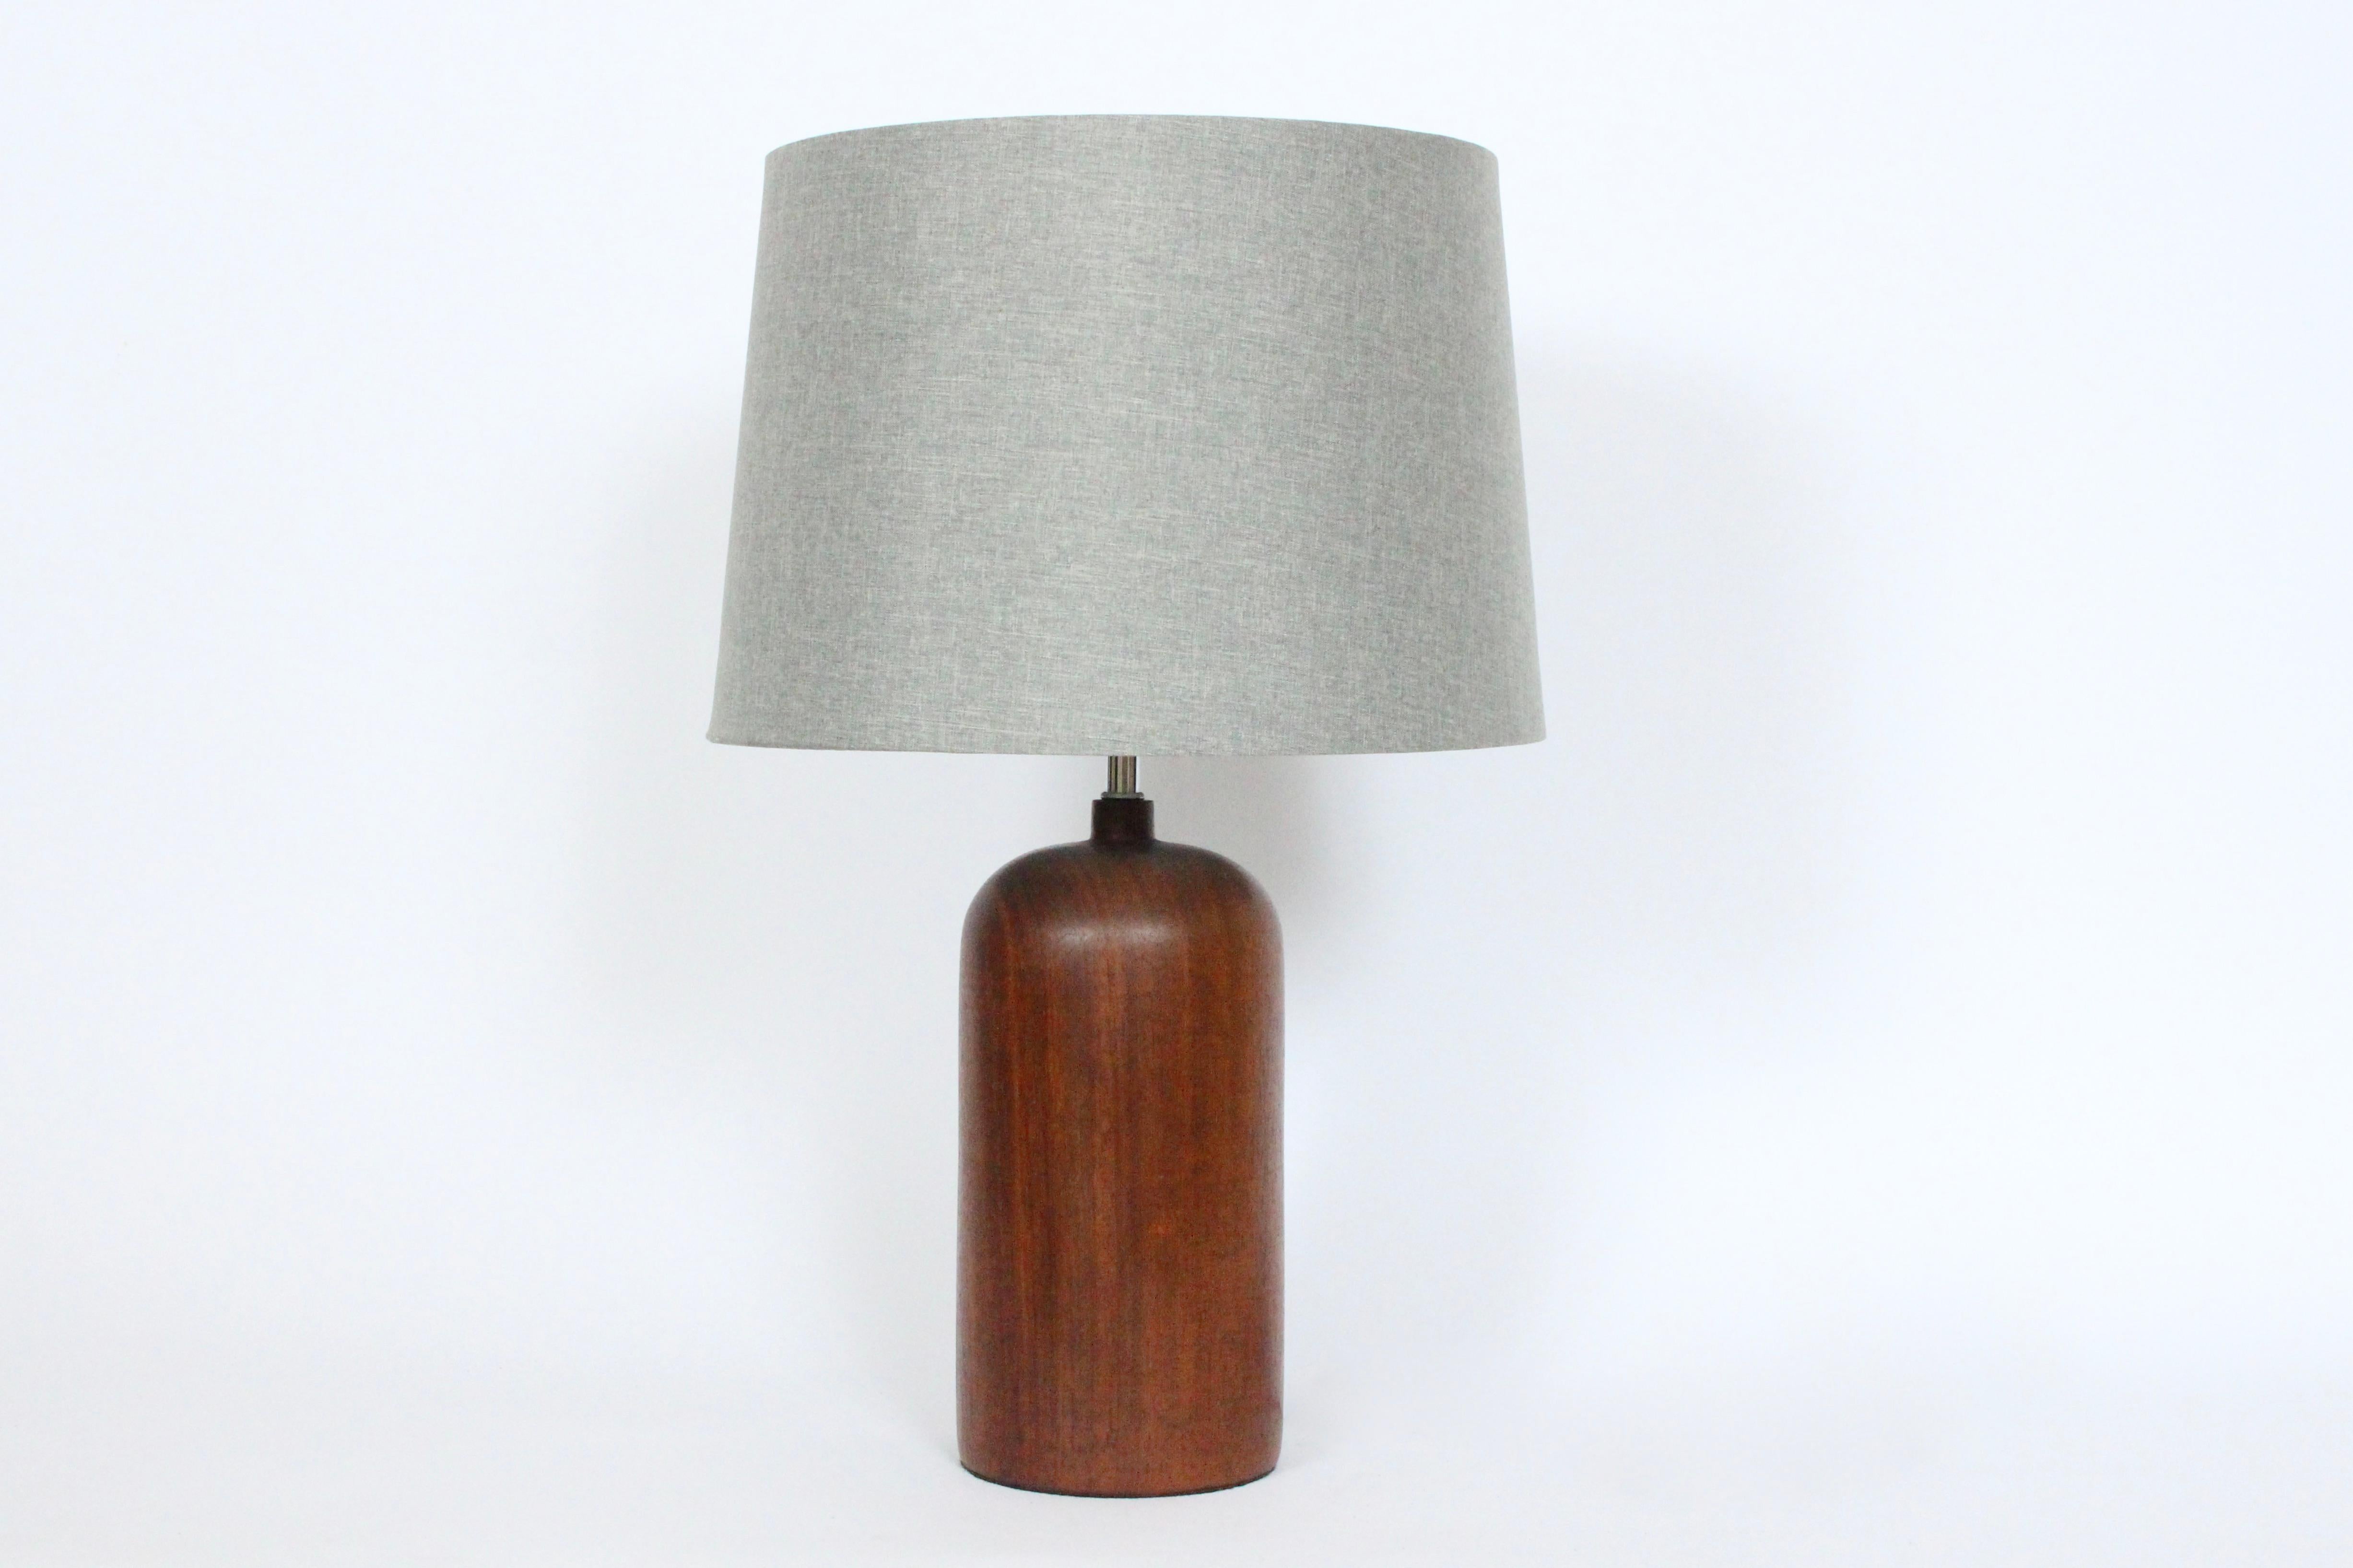 Danish Mid Century Modern turned solid Teak Table Lamp, Circa 1960. Featuring a rounded smooth beautifully grained Dark Teak column form with Chrome neck. 17 H to top of socket. 12H to top of Teak. Shade shown for display and not for sale (10.5H x